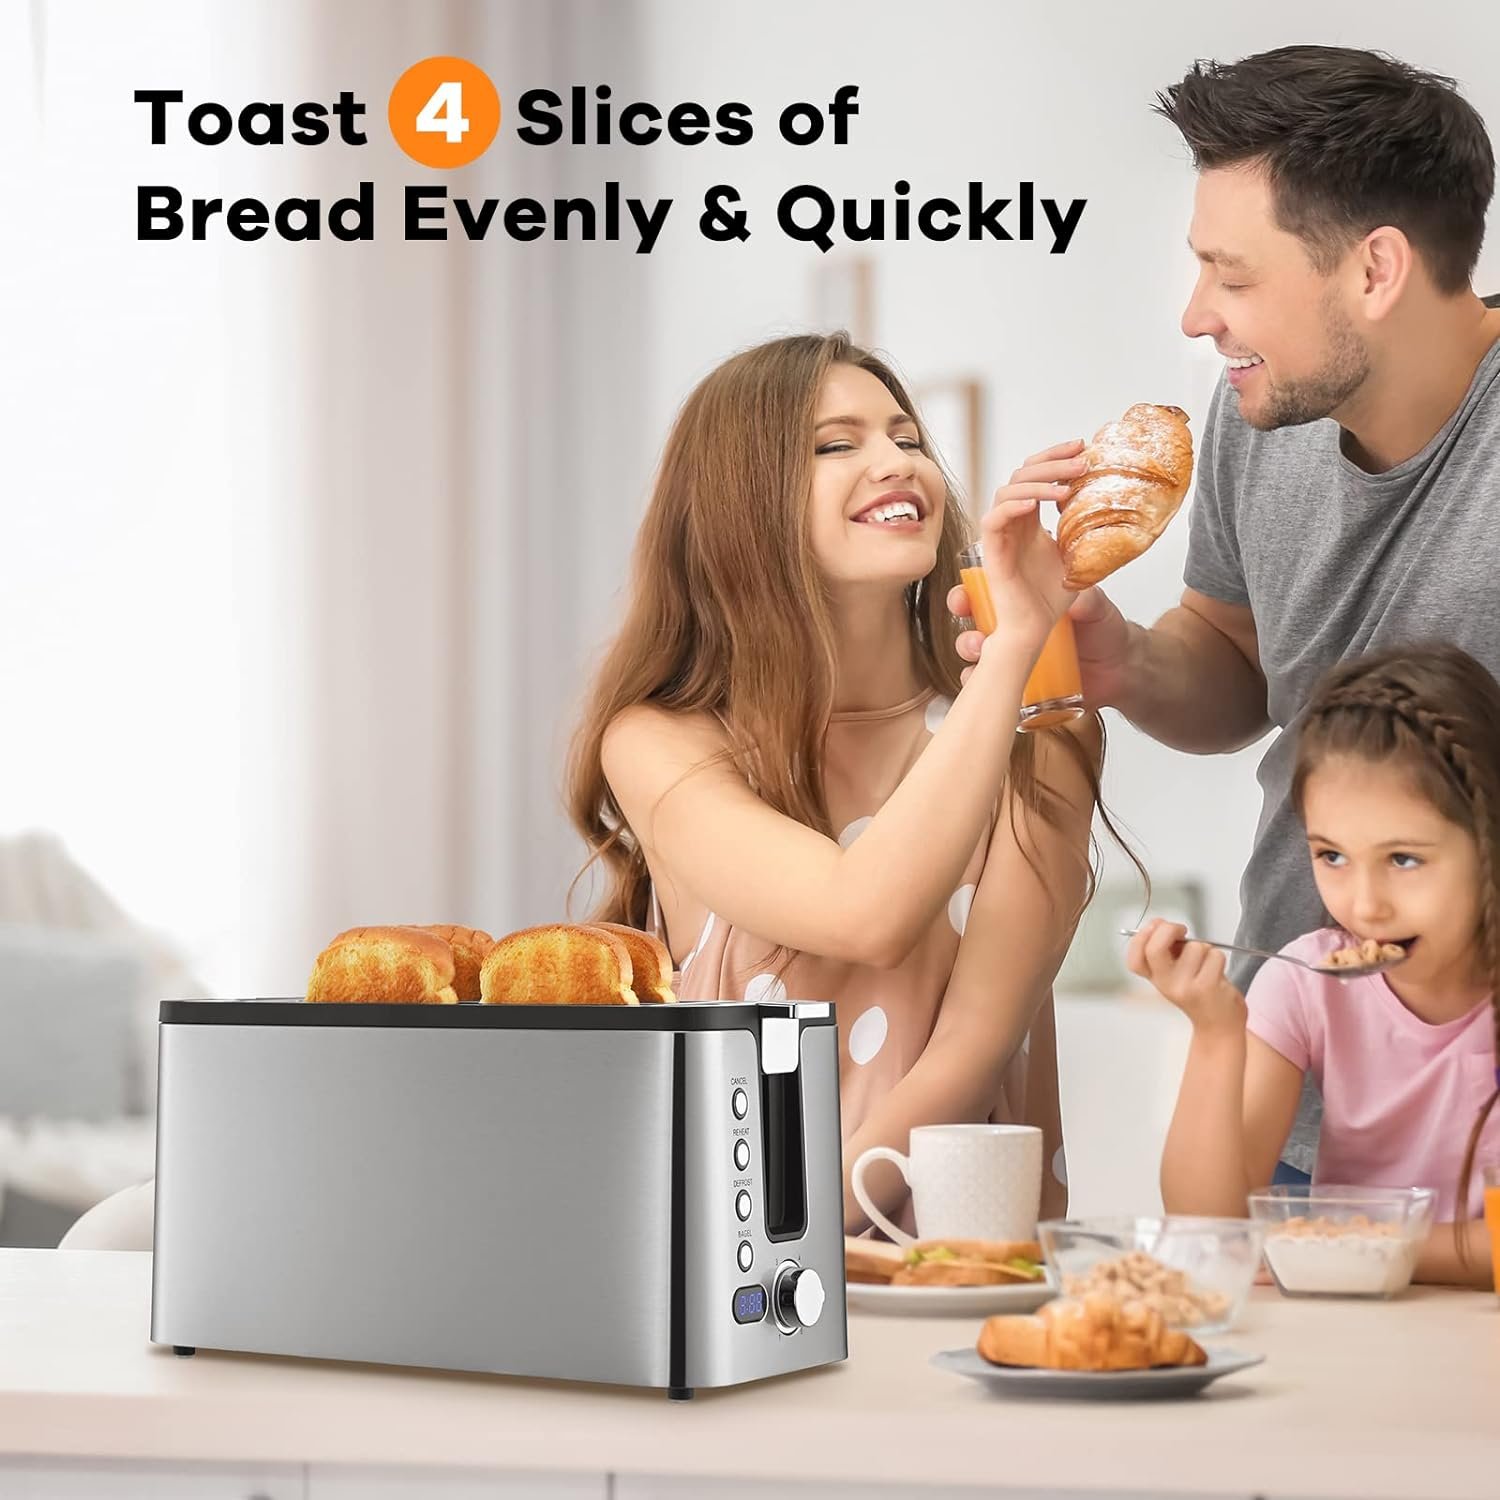 Mecity 4 Slice Bread Toaster With Countdown Timer, Bagel / Defrost / Reheat / Cancel Functions,Warming Rack, removable Crumb Tray, 6 Browning Settings, Extra Wide Long Slots, Stainless Steel, 1300 Watts